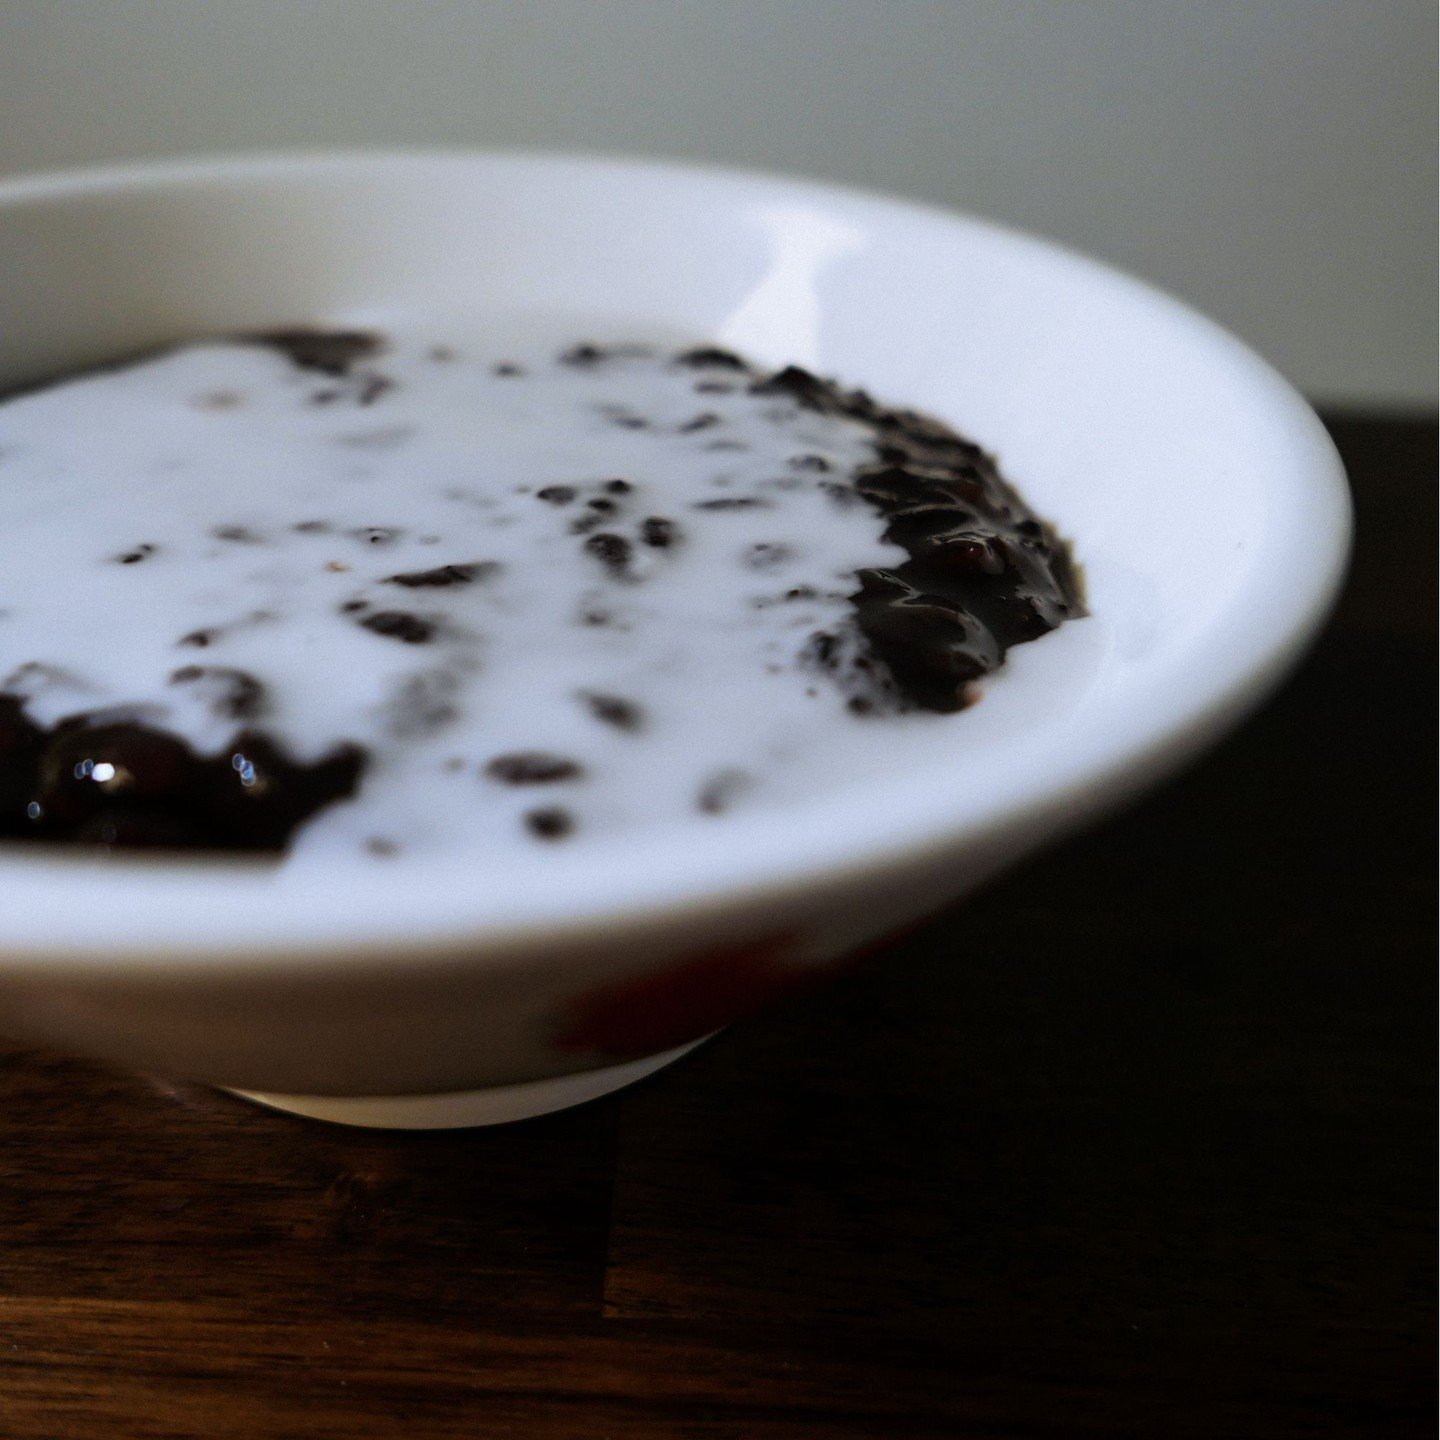 Pulot Hitam
Glutinous black rice dessert cooked with dried longans for a hit of sweetness and topped with creamy coconut milk